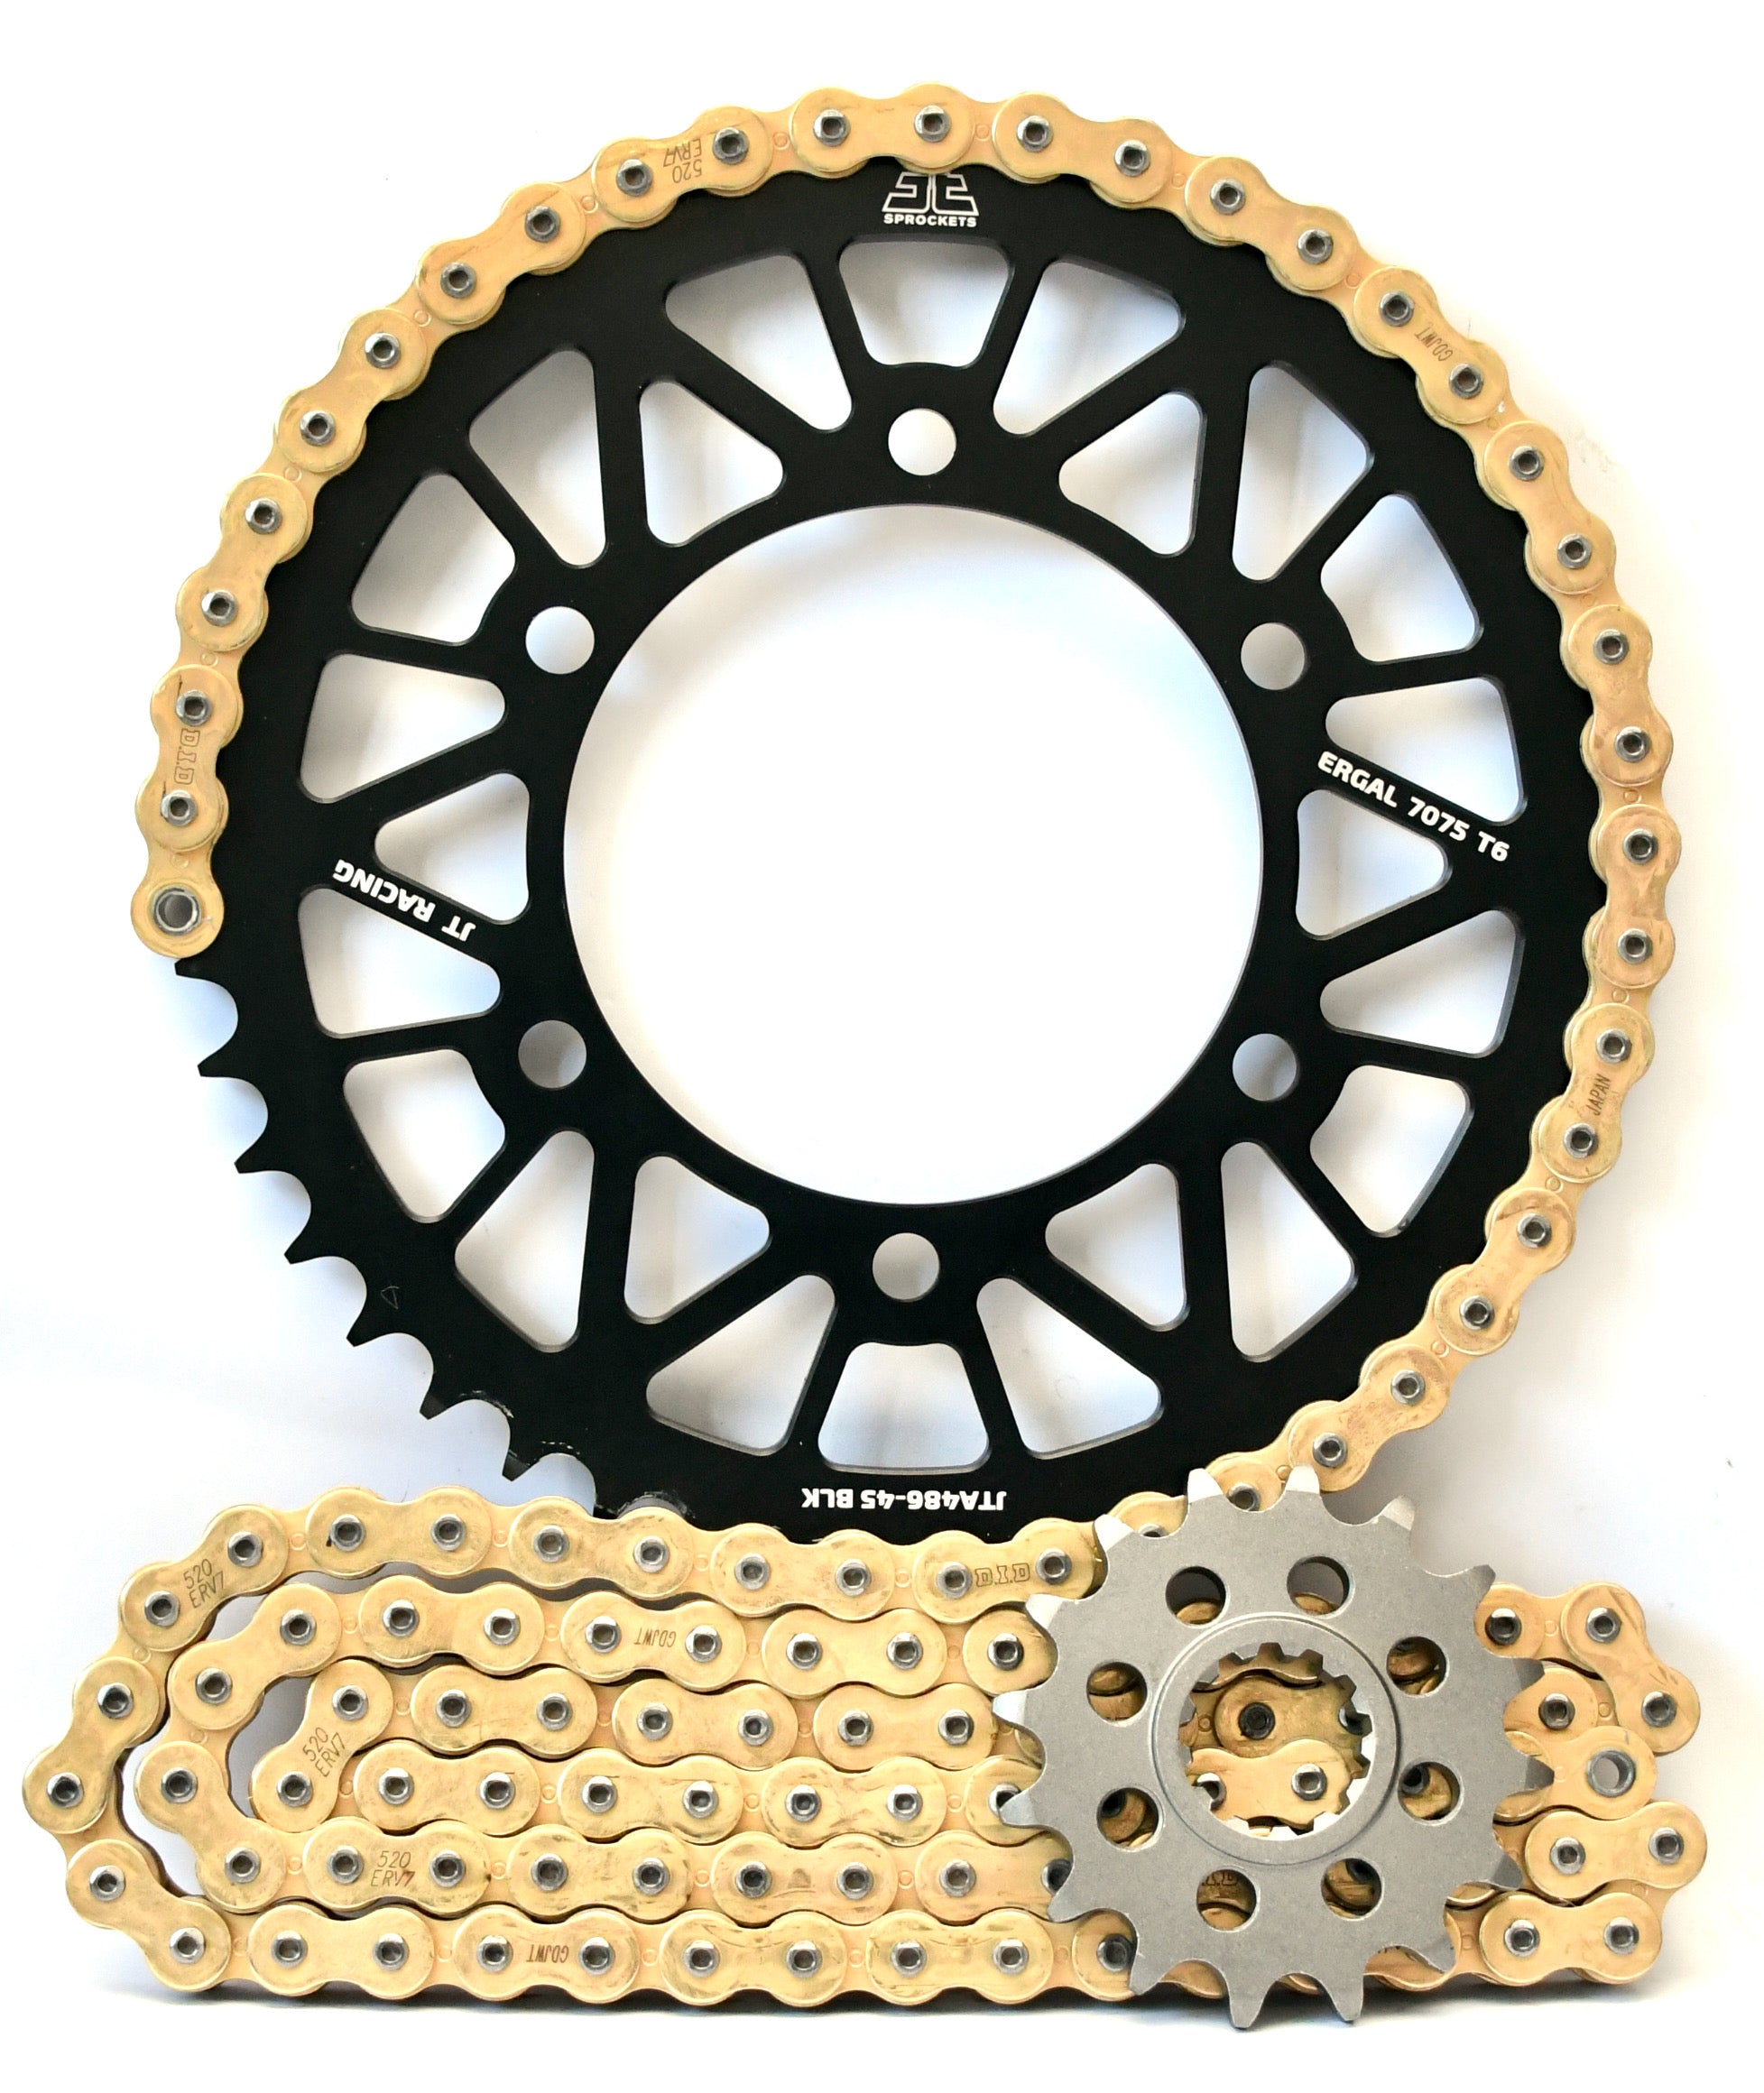 JT Racelite and DID 520 Conversion Chain & Sprocket Kit for Kawasaki ZX-10R 2008-2010 - Standard Gearing